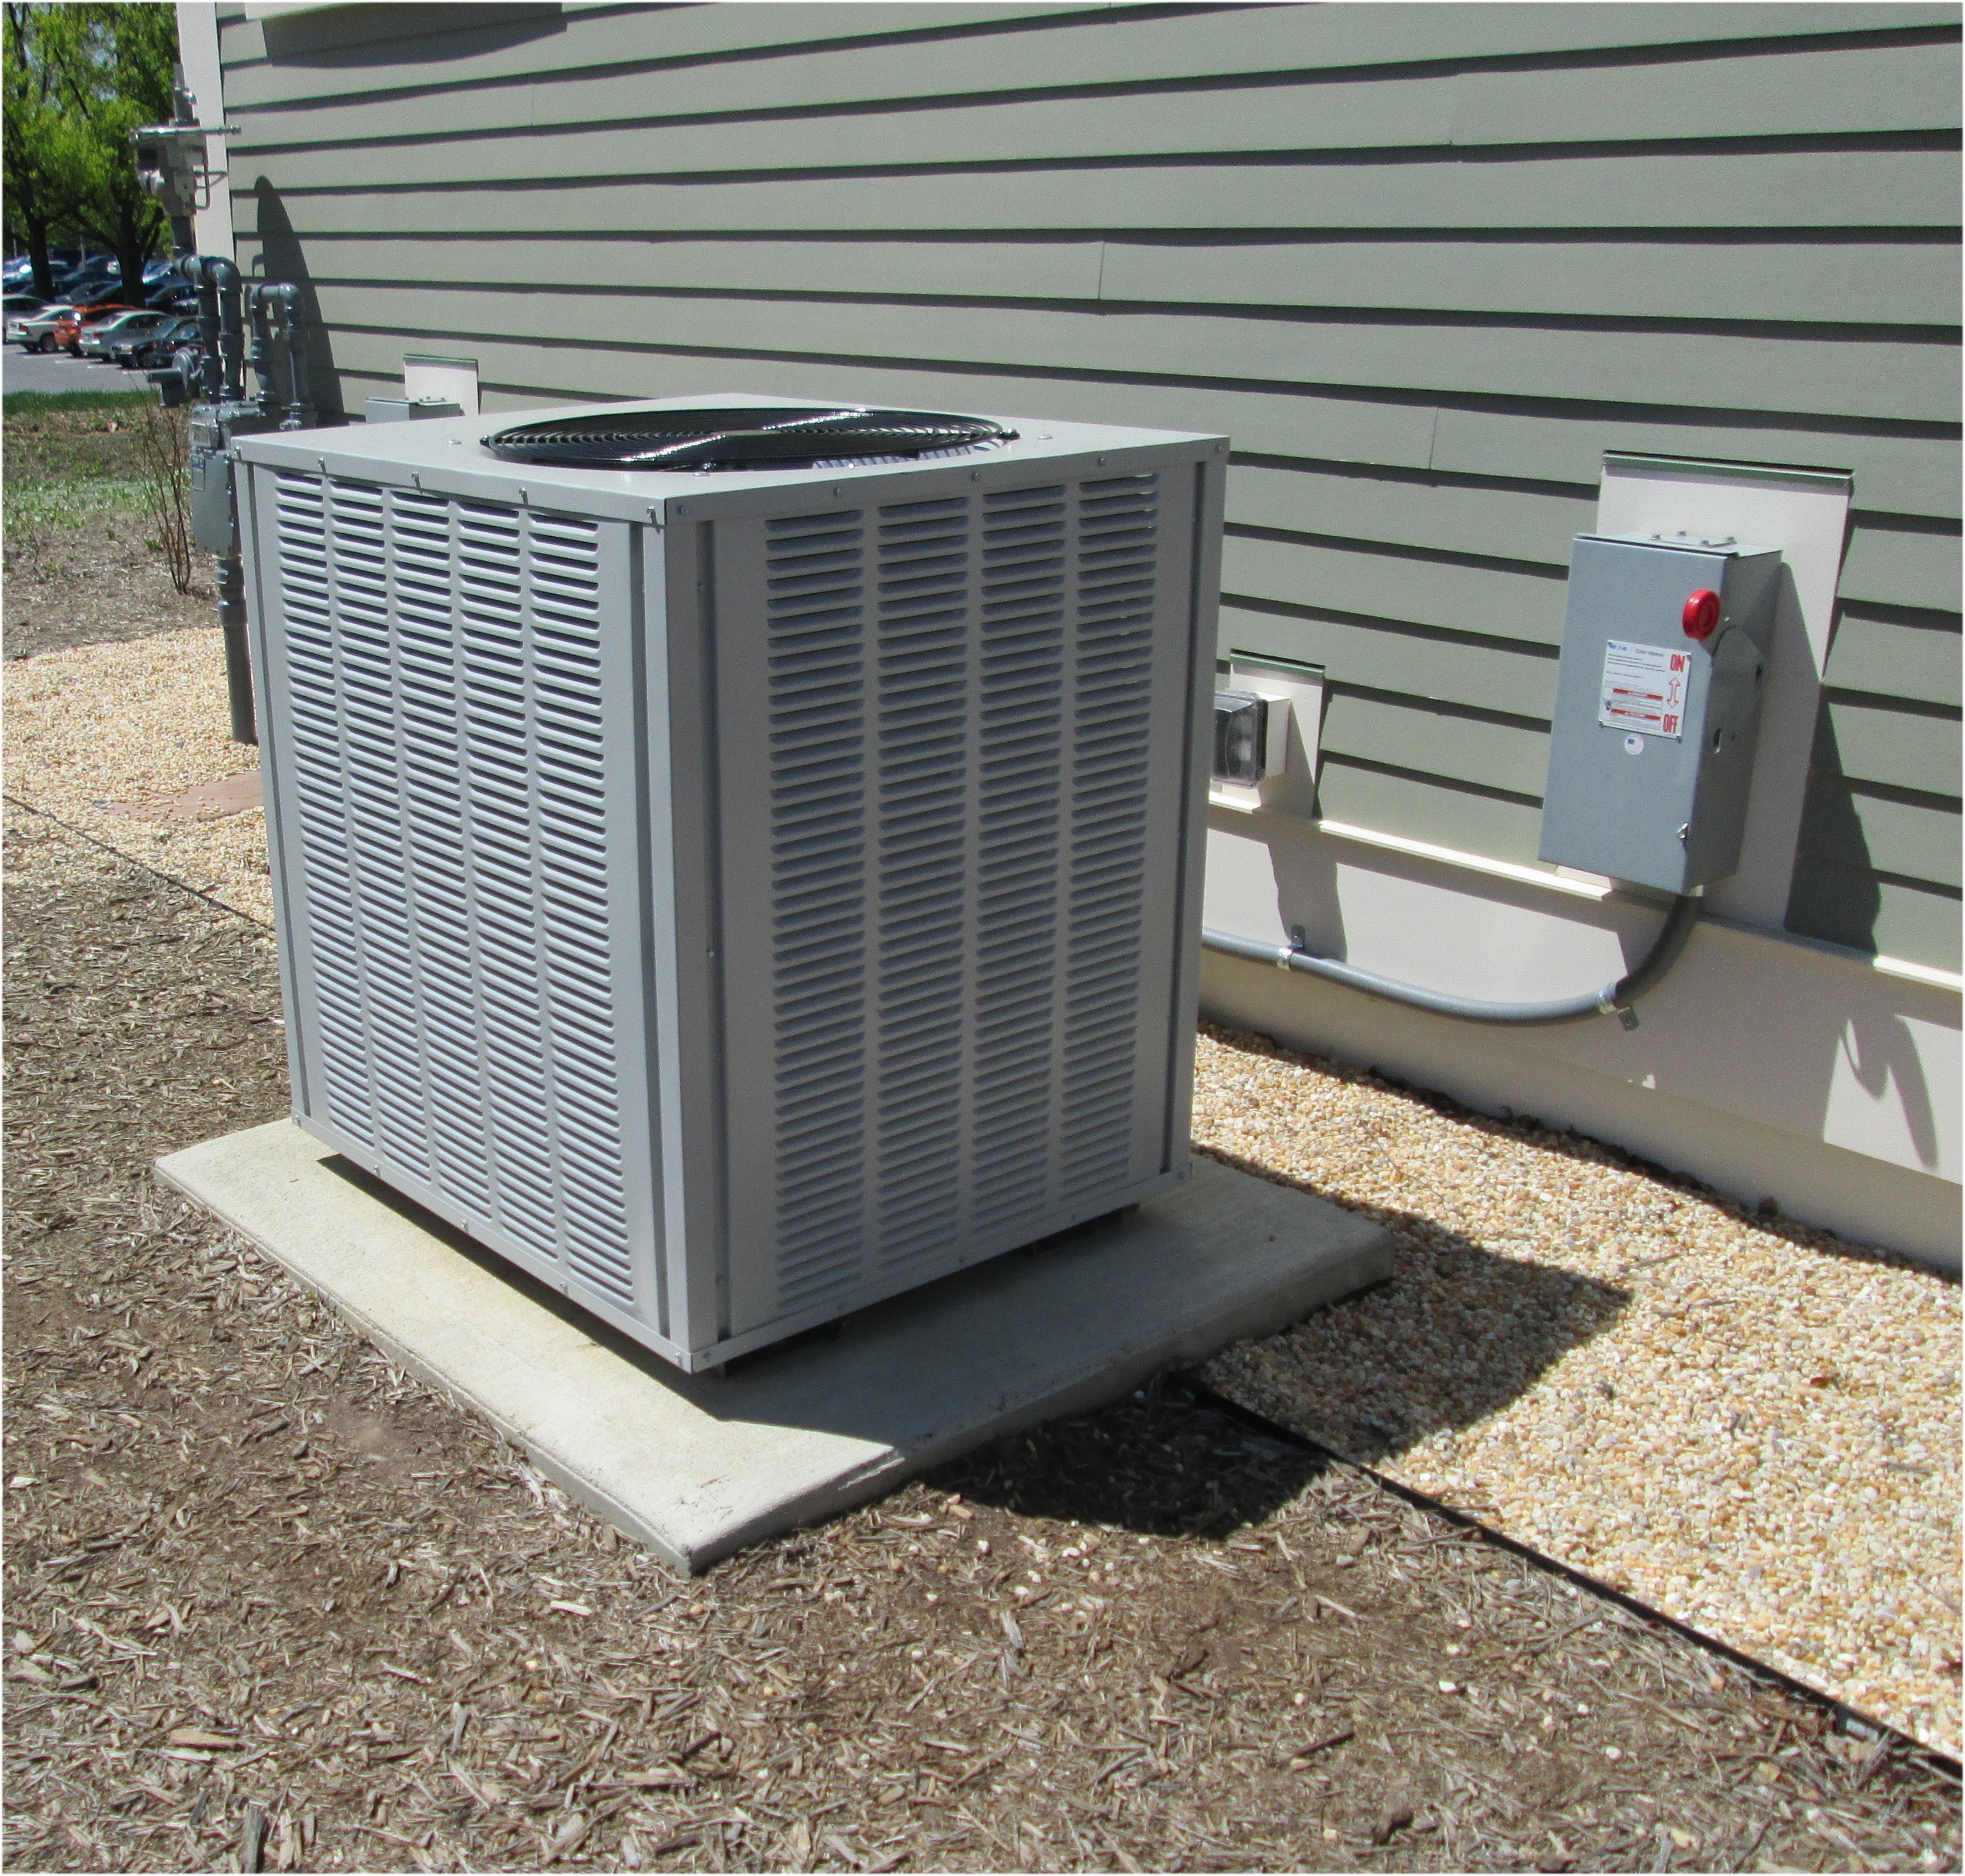 Heating And Air Conditioning Companies In Wichita Ks